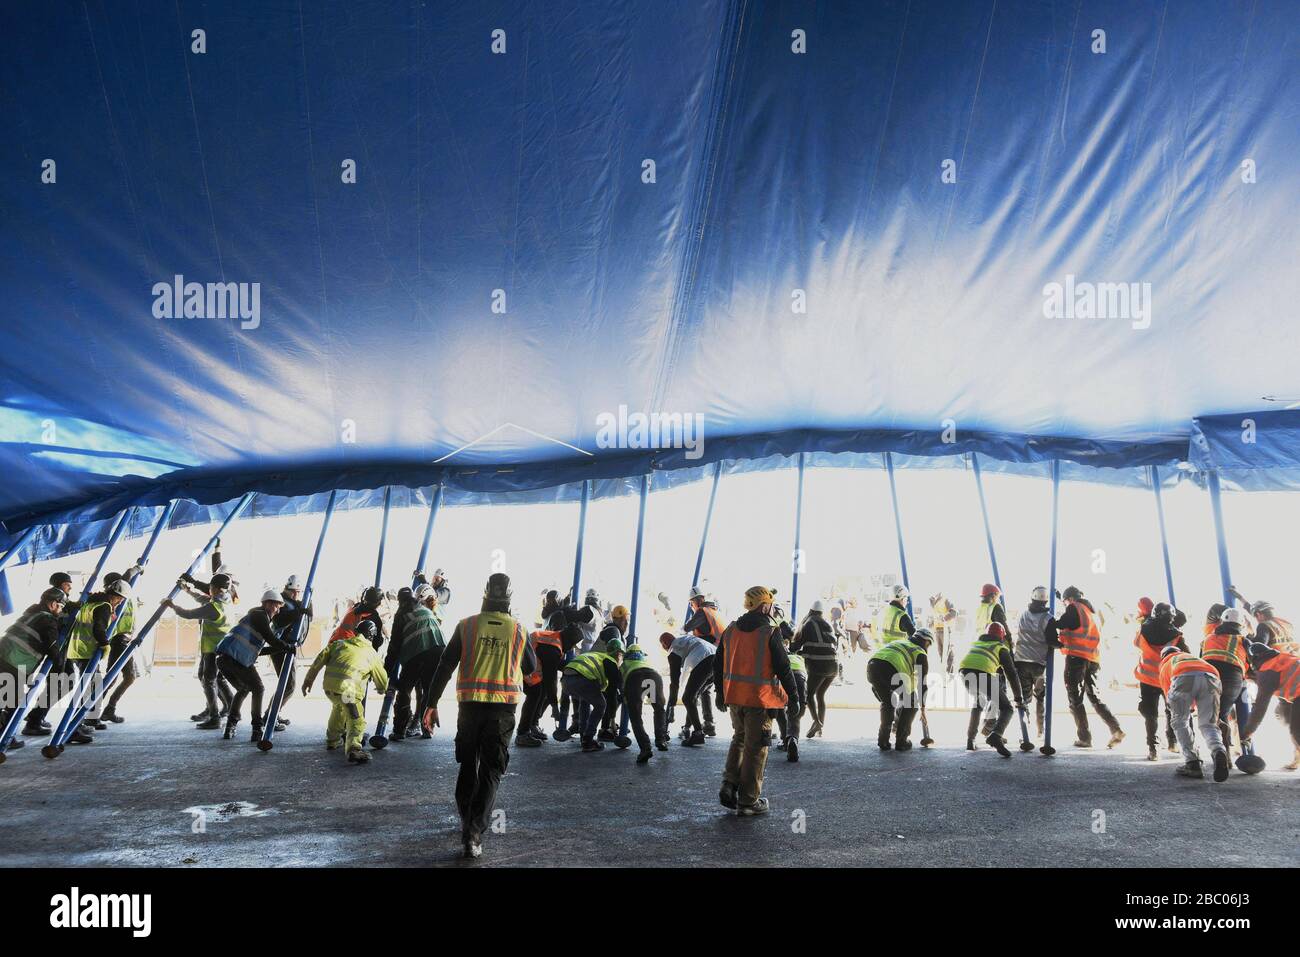 Cirque du Soleil sets up its circus tent for the show "Totem" on Munich's Theresienwiese. [automated translation] Stock Photo